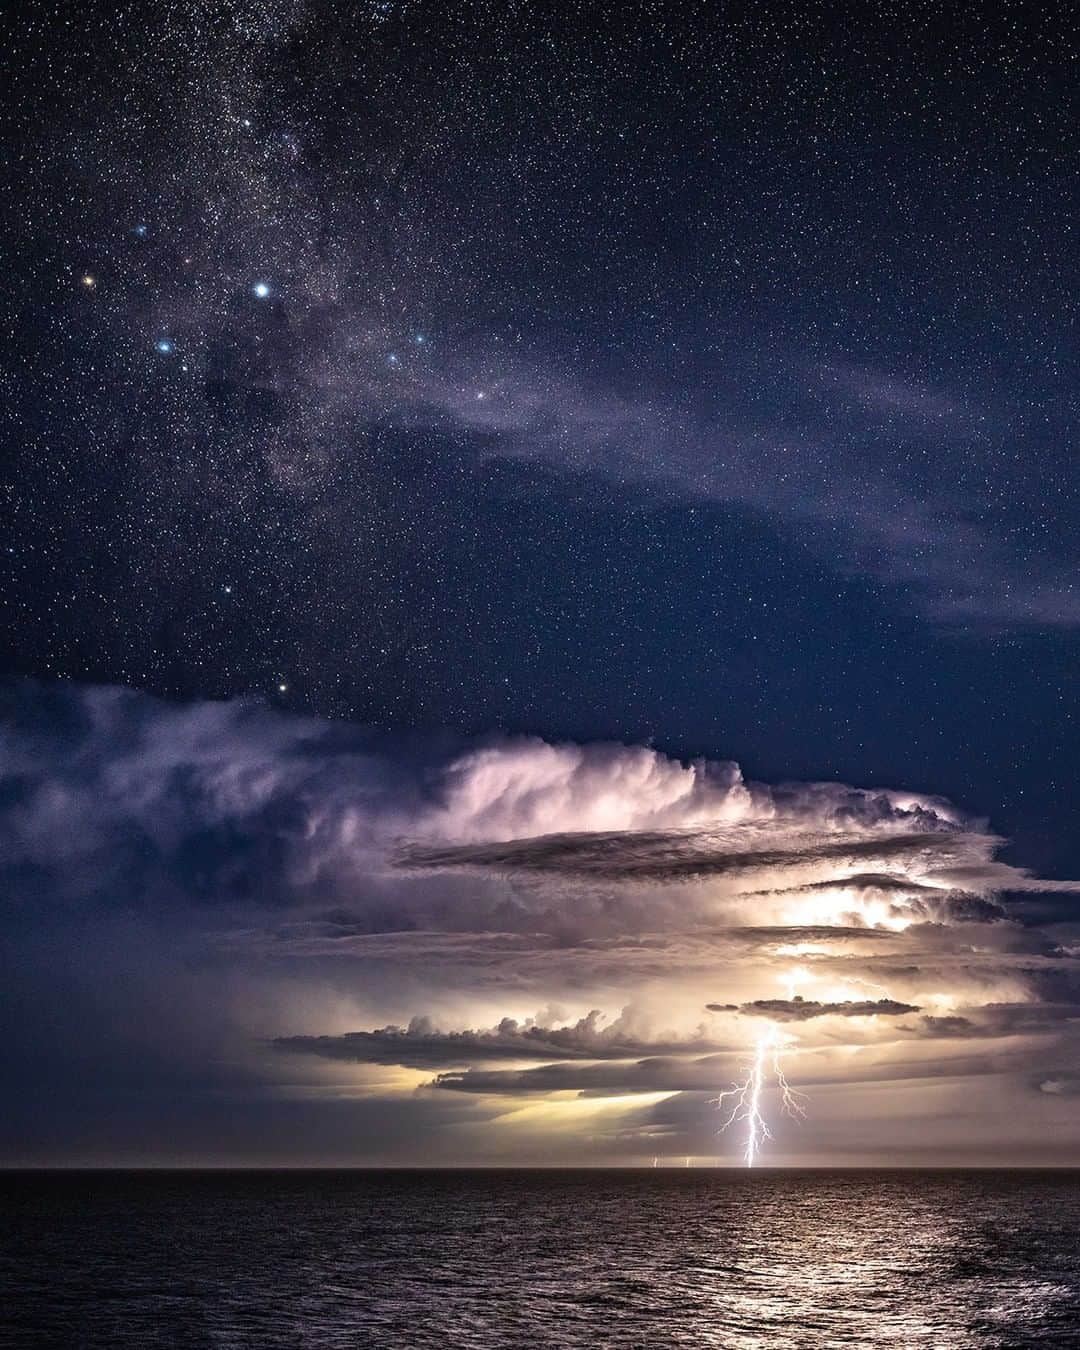 Nikon Australiaのインスタグラム：「"Seeing this ocean storm flashing under the Southern Cross went from awesome to amazing when a huge bolt lit up the night. Unbelievably, a shooting star also shot through the sky at the same time. Nature!" - @willeadesphotography   Camera: Nikon Z 7 Lens: NIKKOR Z 14-24mm f/2.8 S Settings: 24mm  f/2.8  20s  ISO 500  #Nikon #MyNikonLife #NikonAustralia #NikonZ7 #Z7 #ZSeriesAU #StormPhotography #Astrophotography #StormChasers #Nightscapers #Storm」